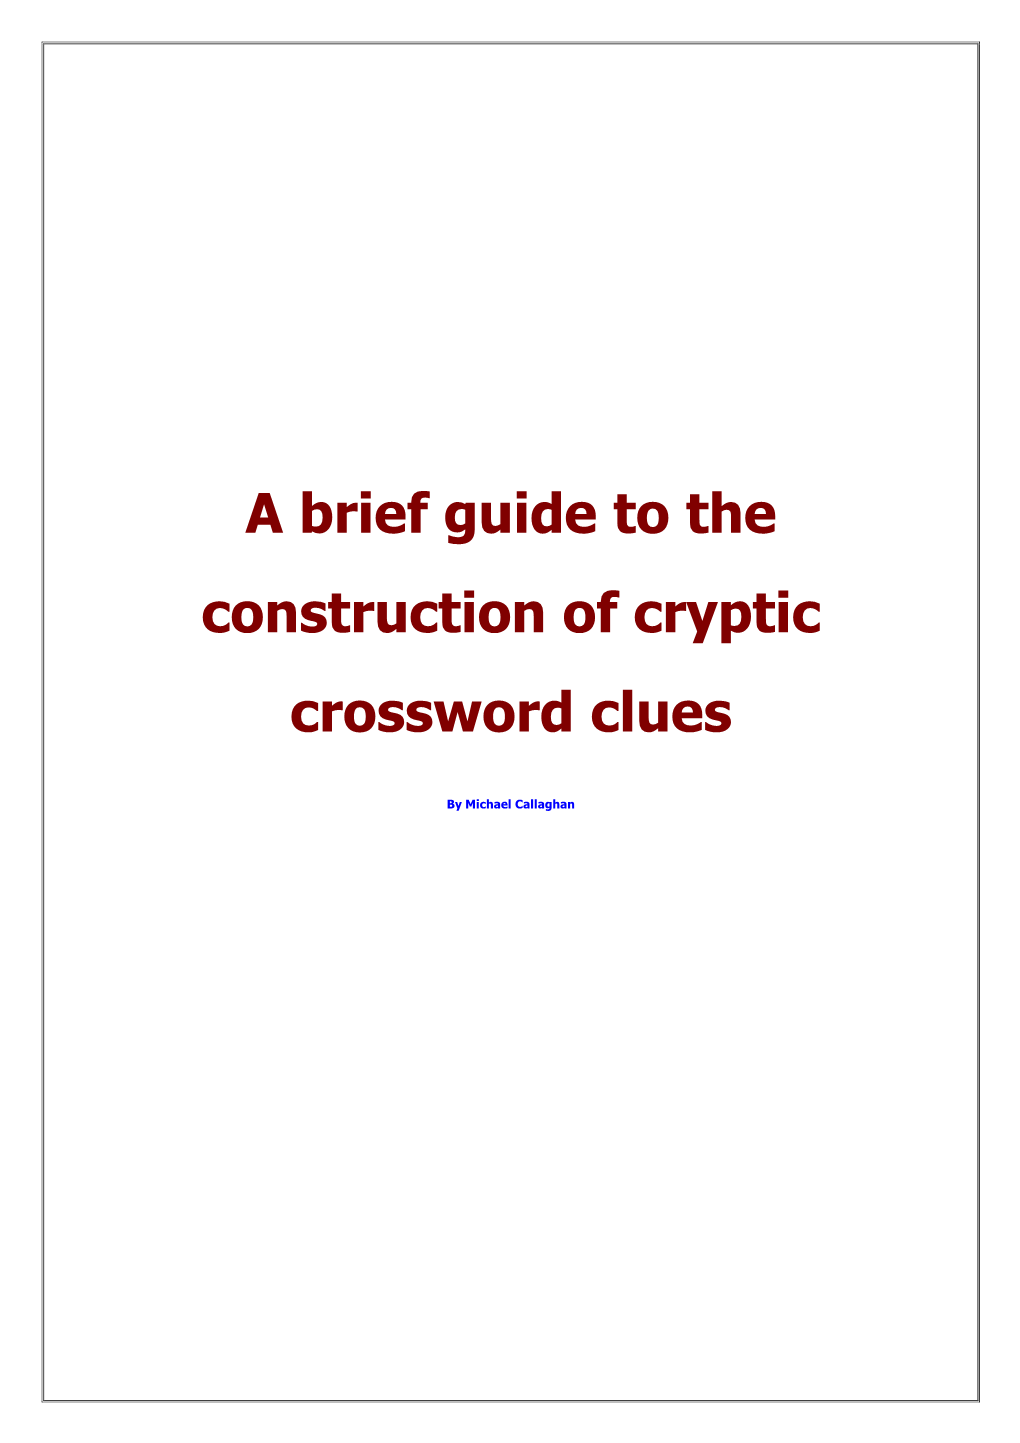 A Brief Guide to the Construction of Cryptic Crossword Clues